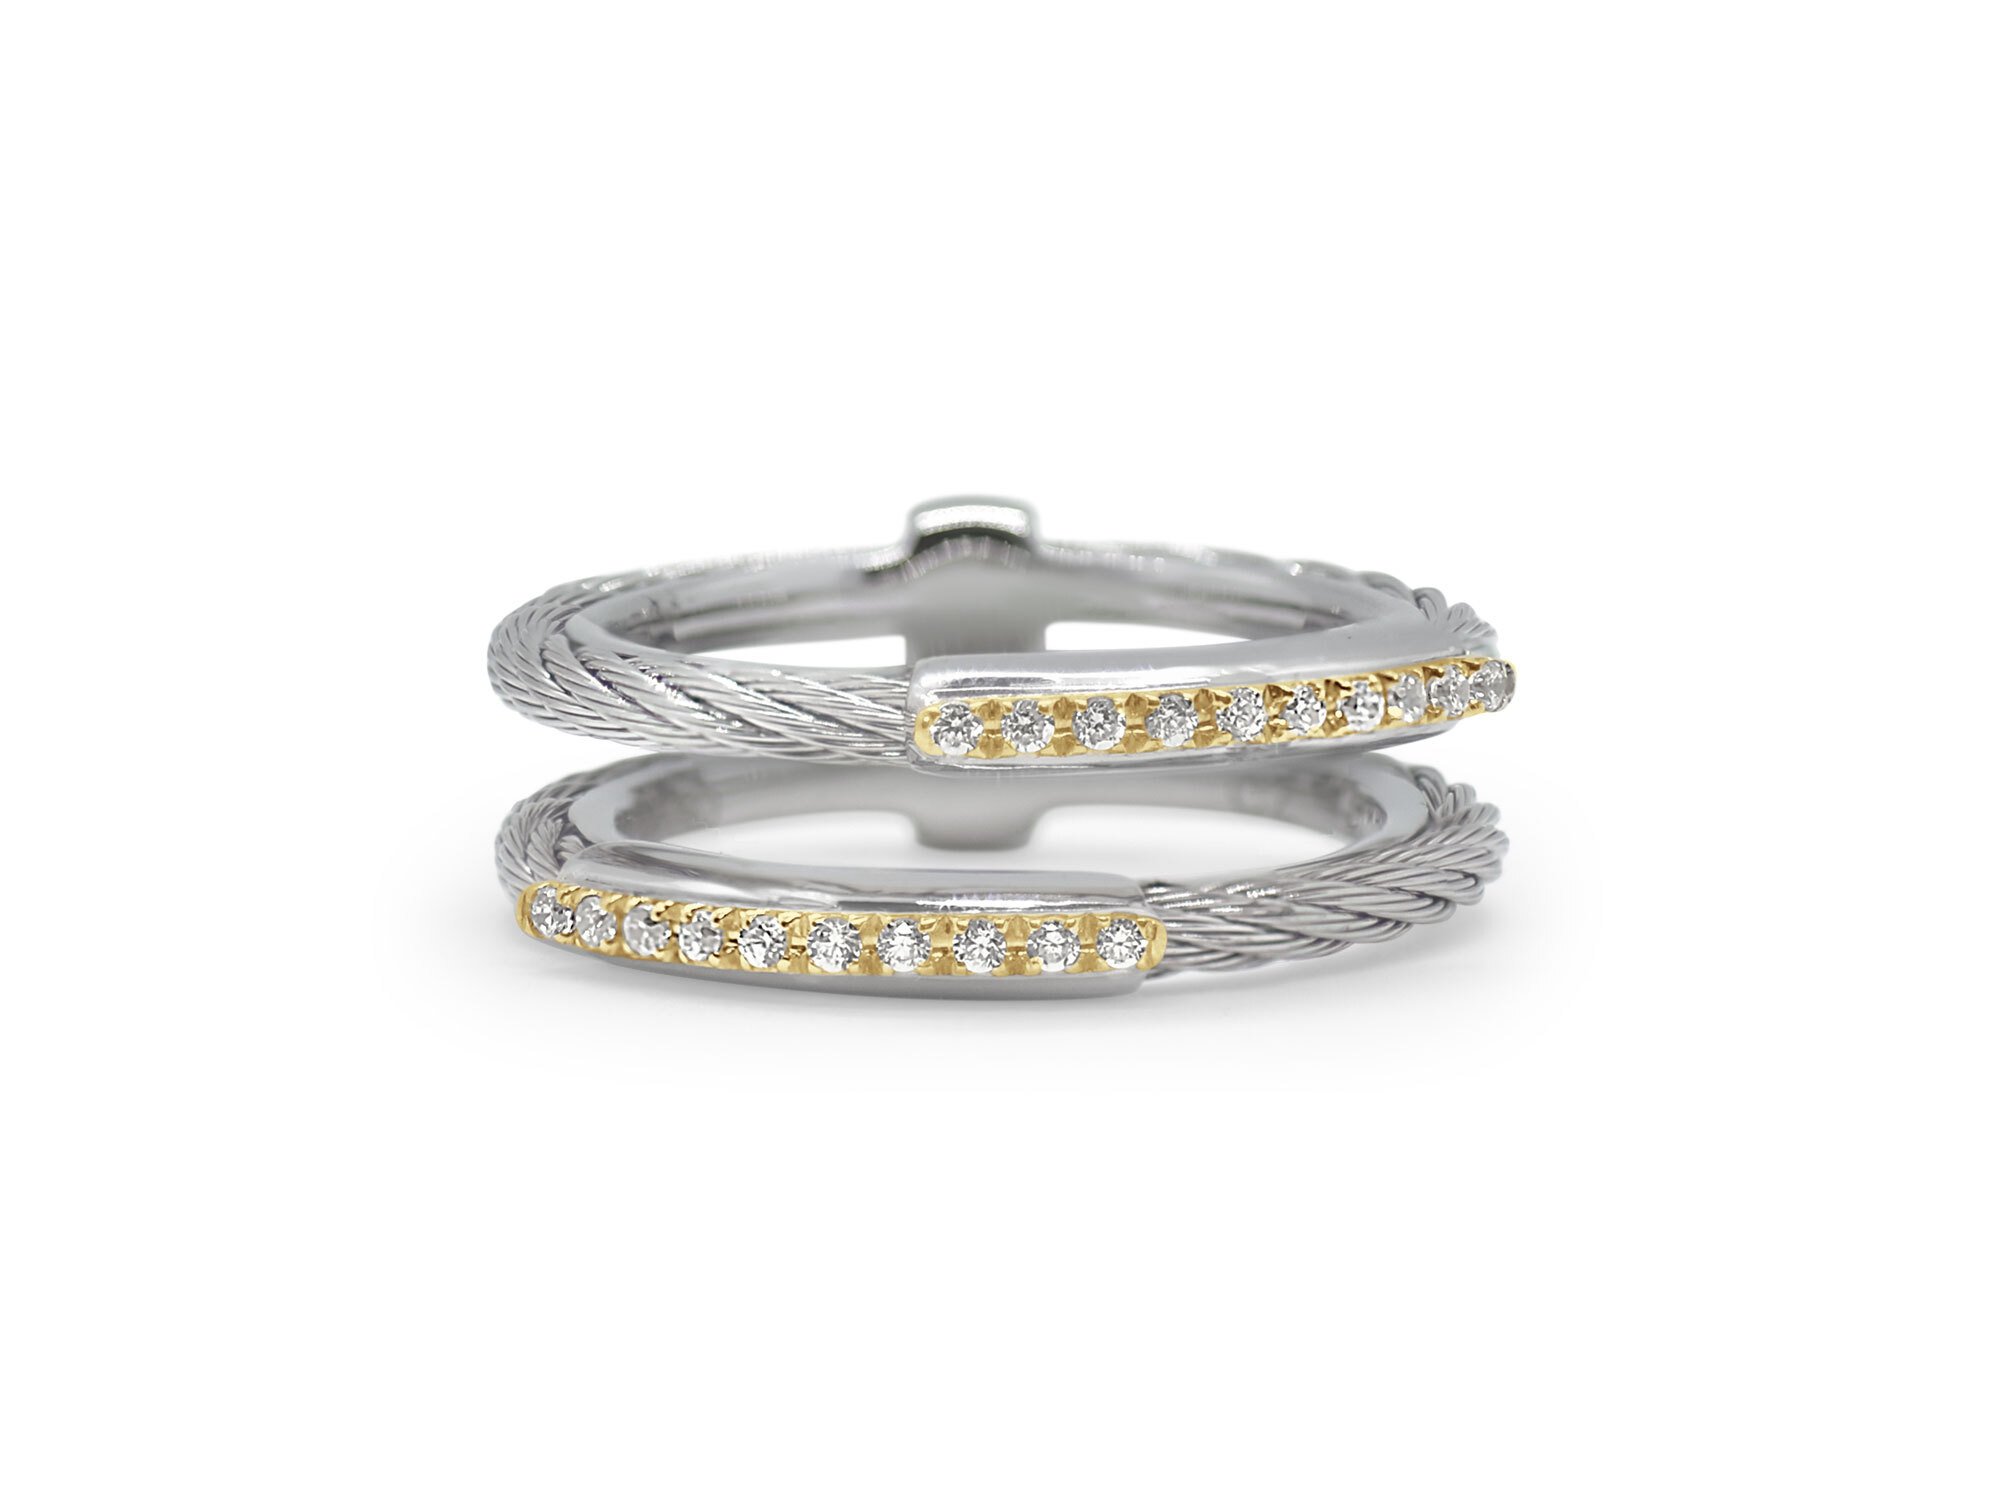 Grey Cable Petite Channel Bar Ring with 18kt Yellow Gold